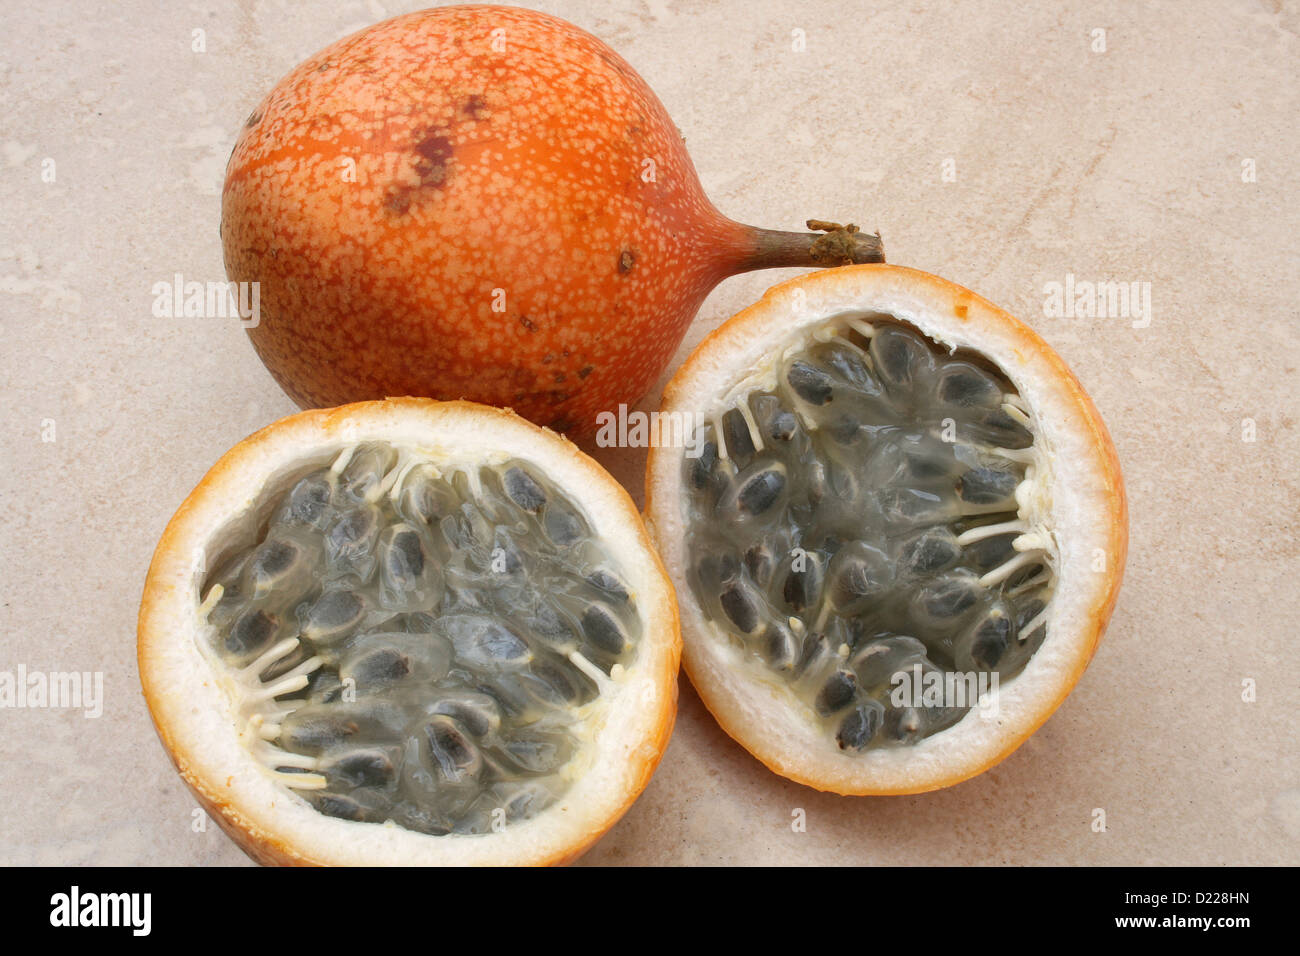 Granadilla fruit has a hard shell and soft pulp with seeds and is grown locally in Cotacachi, Ecuador Stock Photo